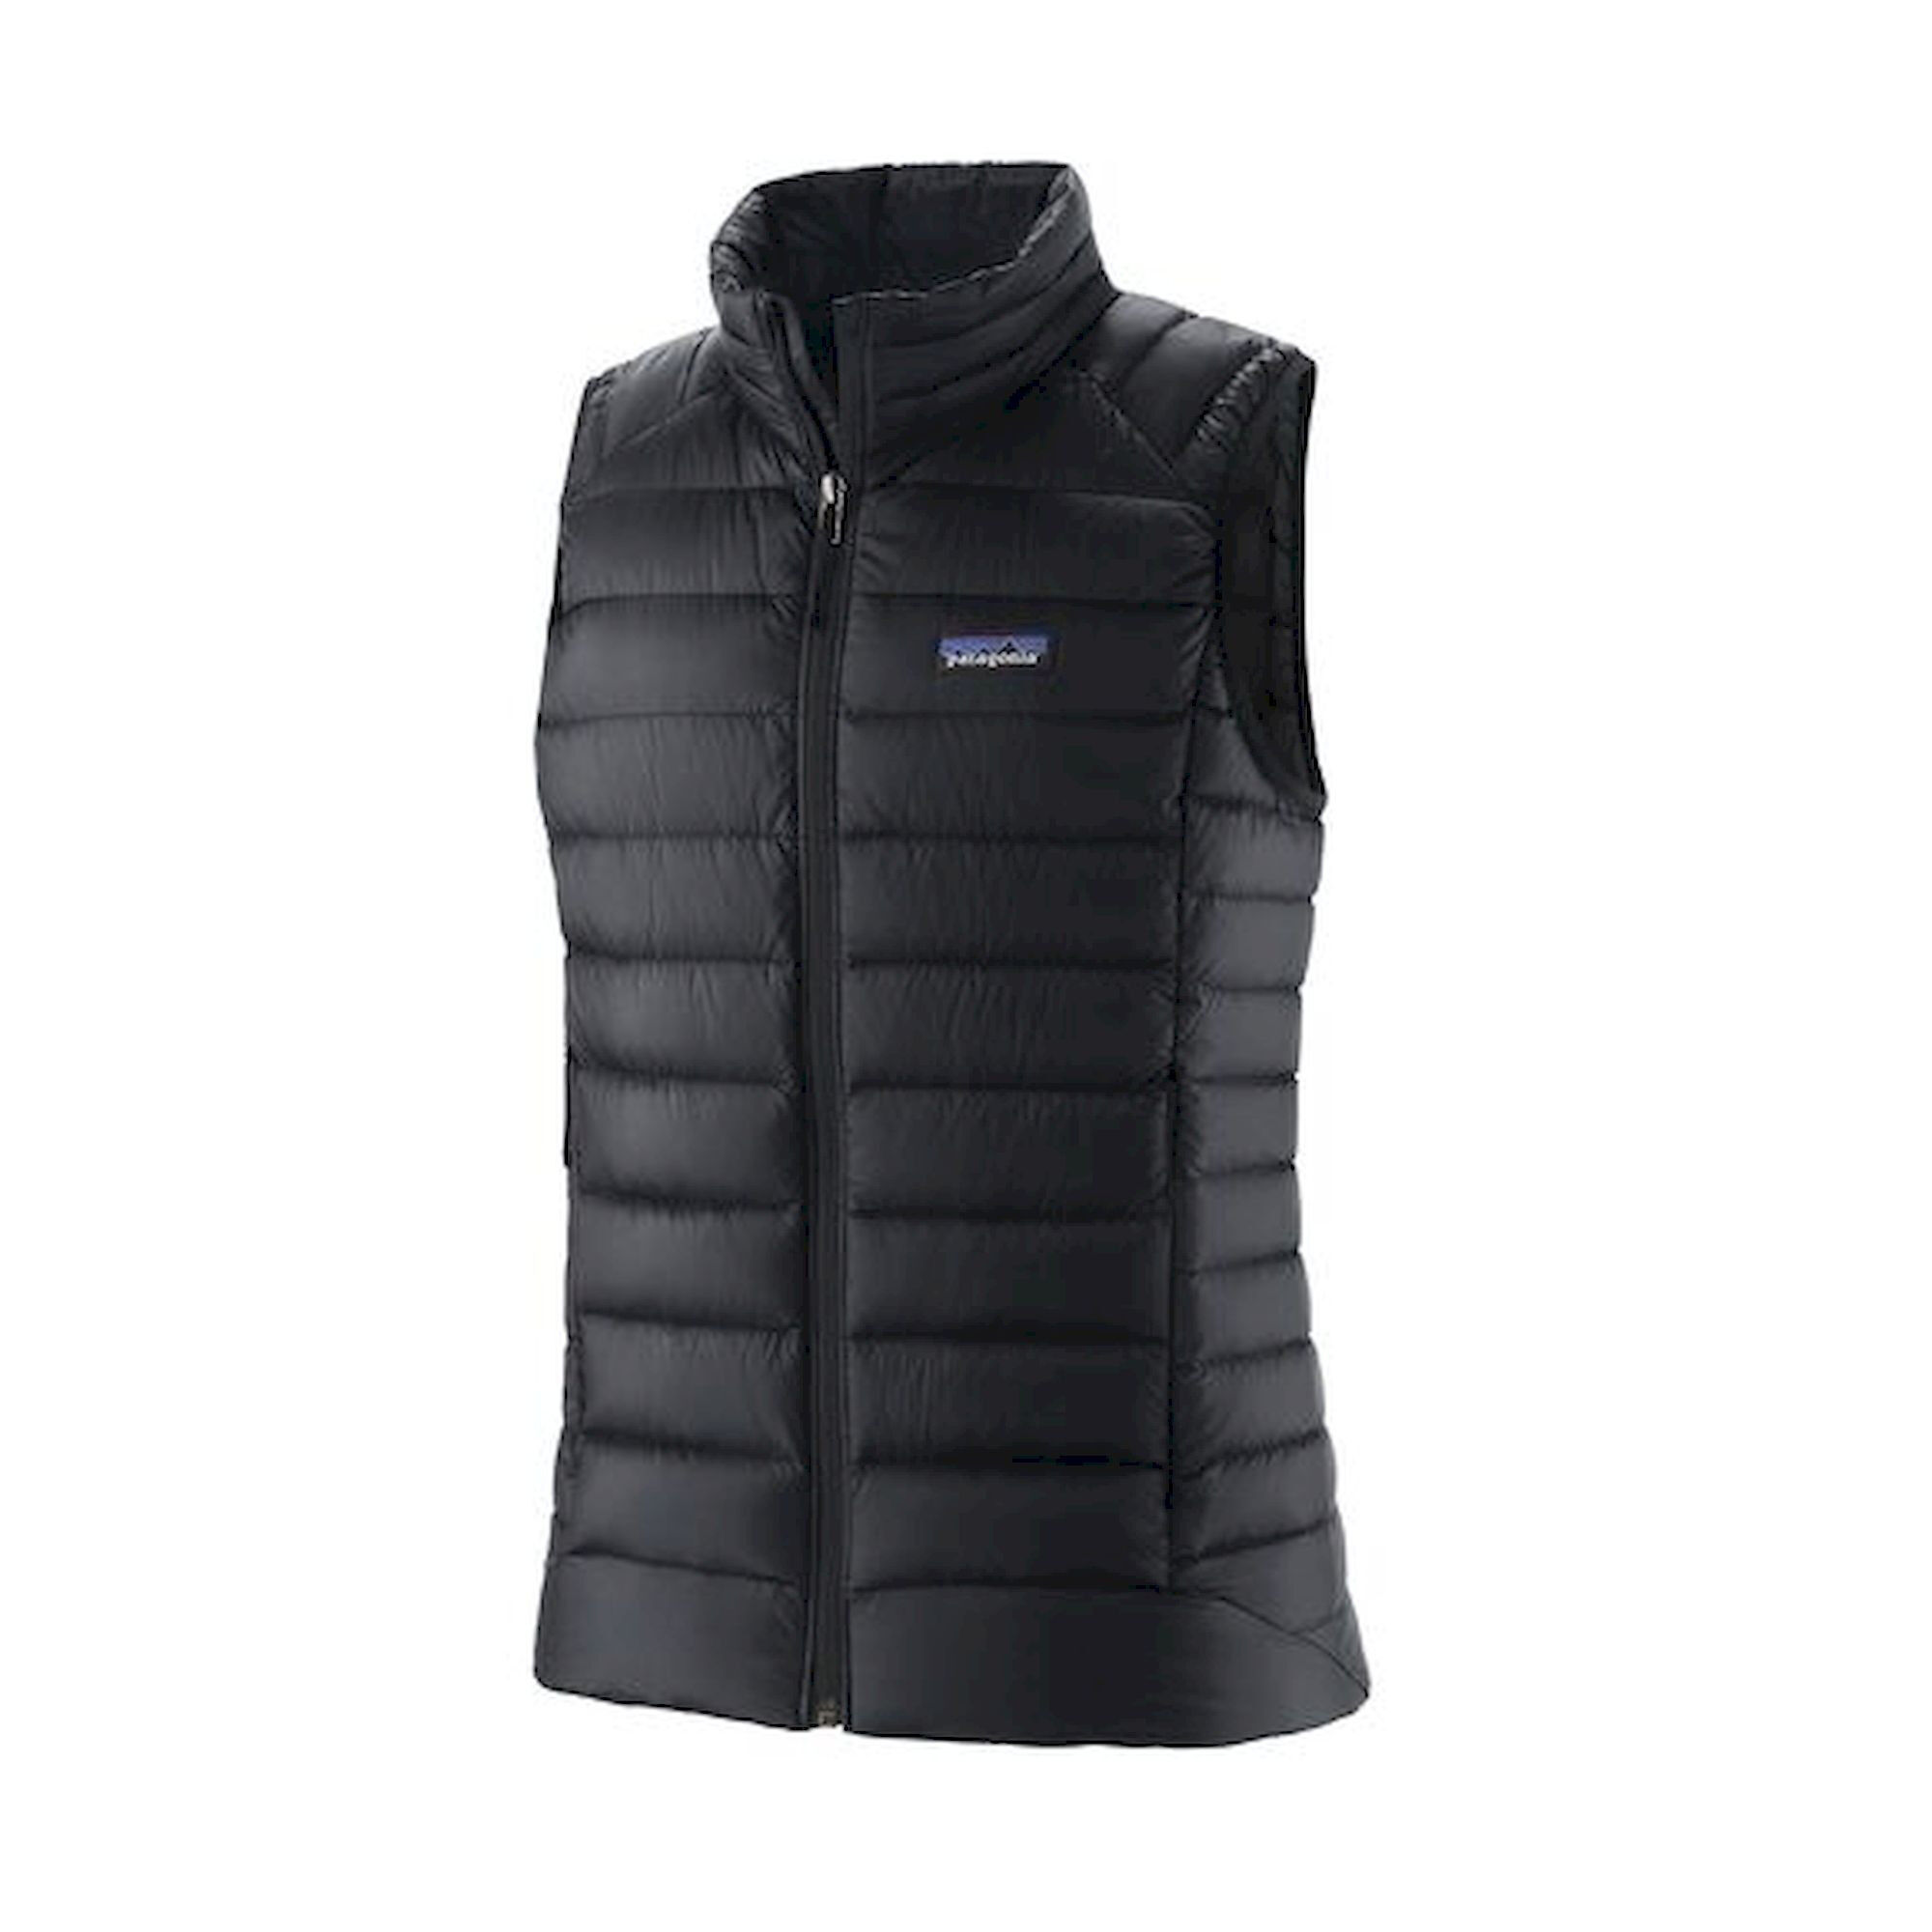 Patagonia Down Sweater Vest - Down - Women's